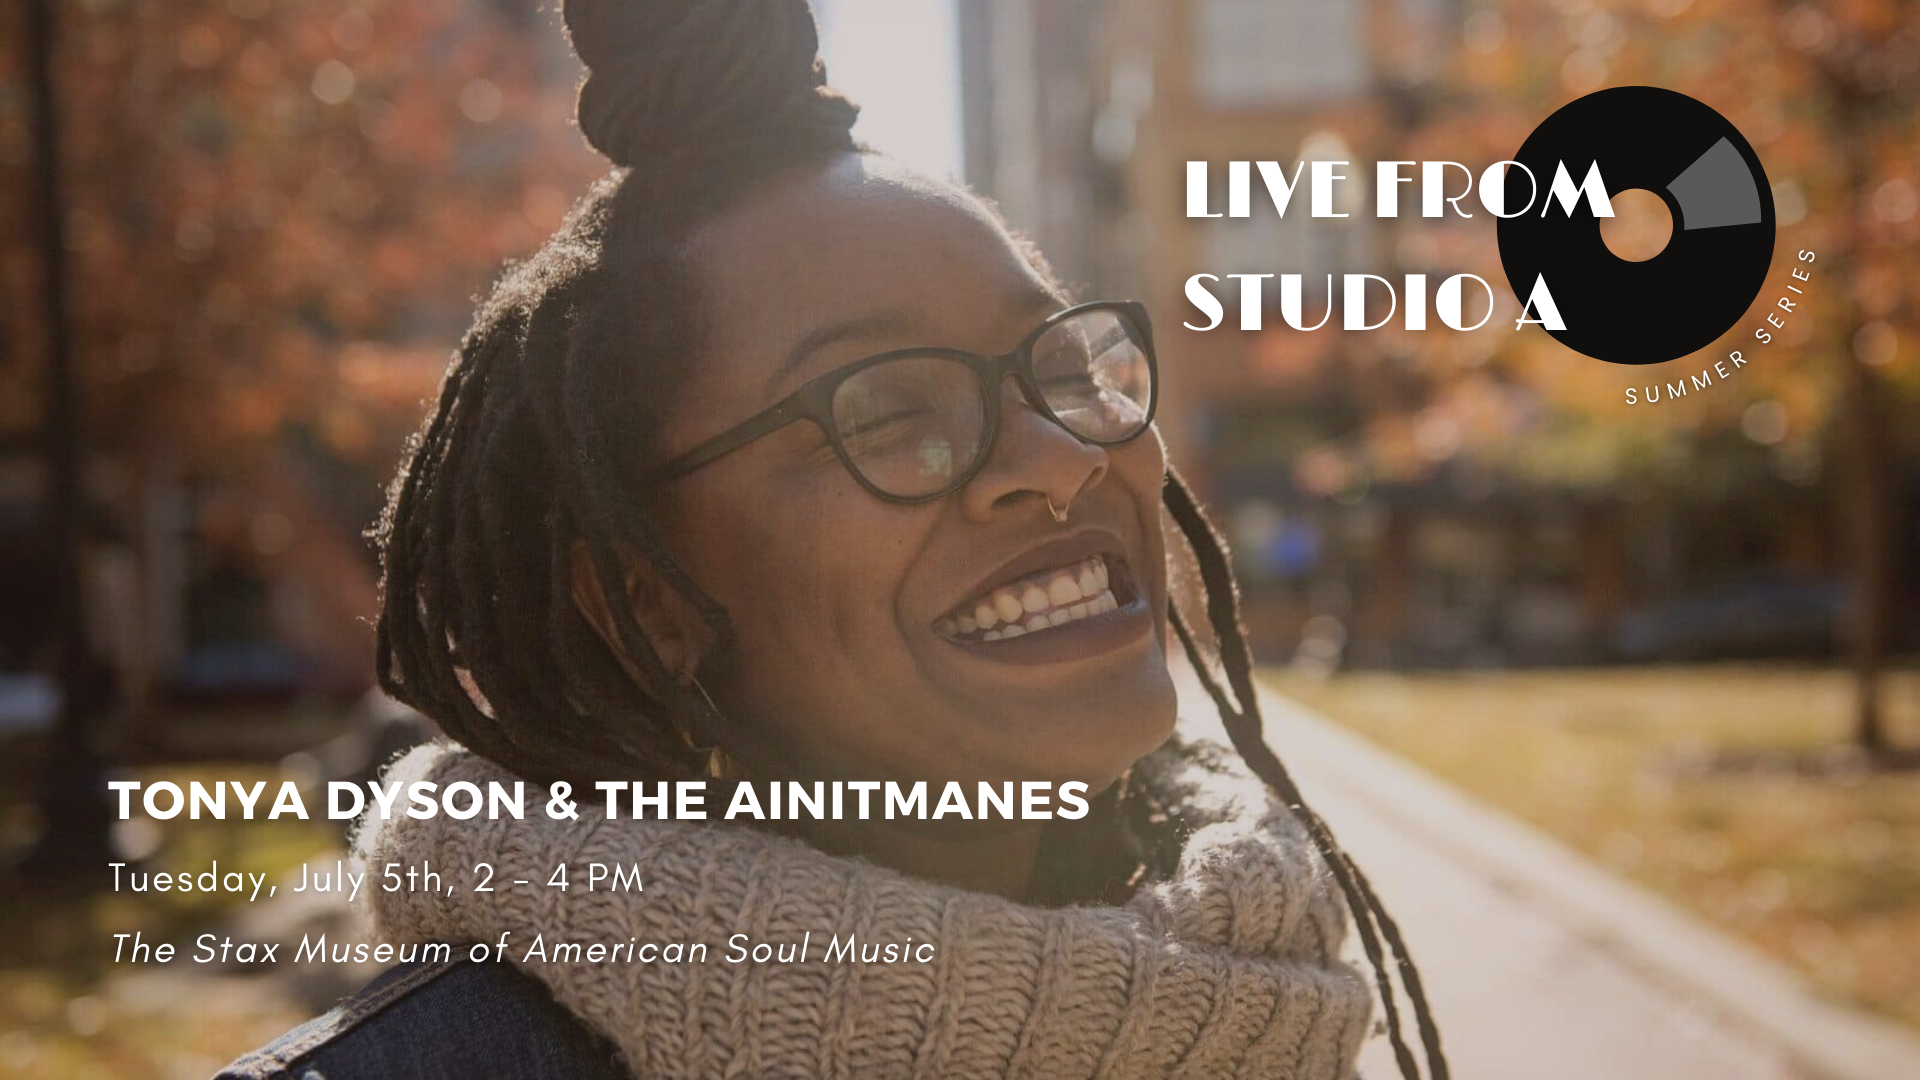 LIVE IN STUDIO A at the Stax Museum: Tonya Dyson & The Ainitmanes Facebook Event Cover Black Cream from studio A 1